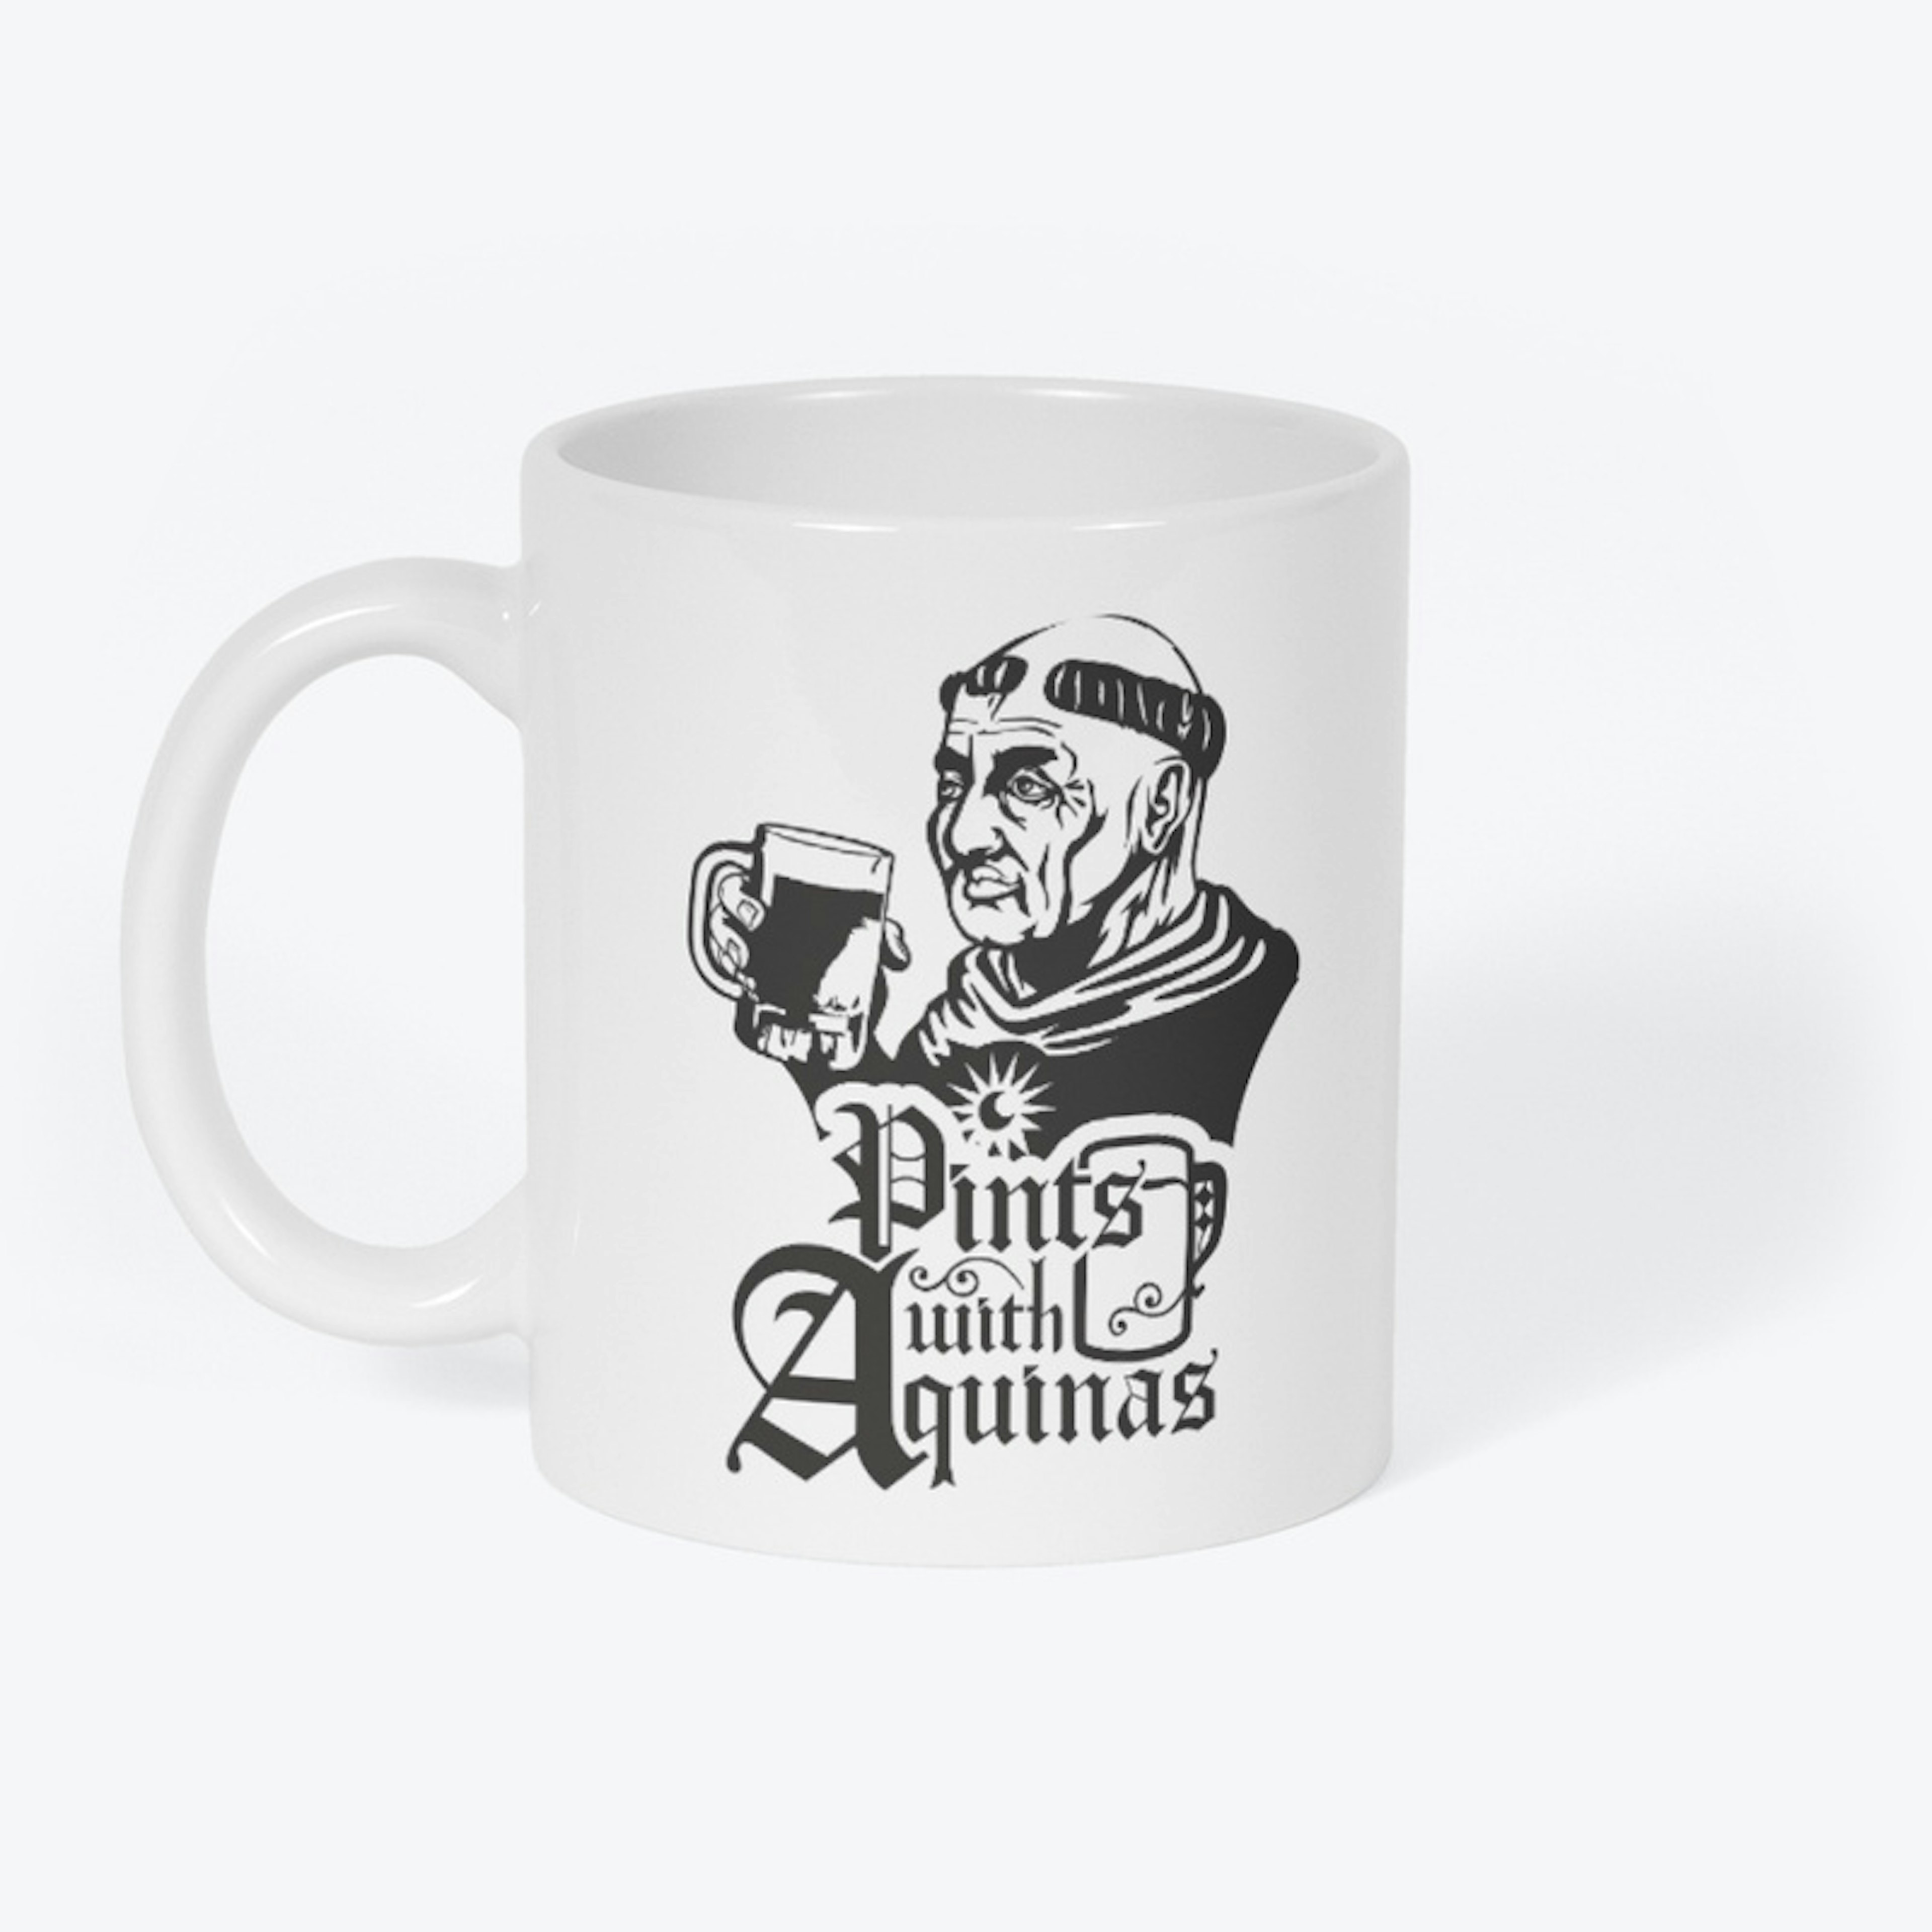 Pints With Aquinas